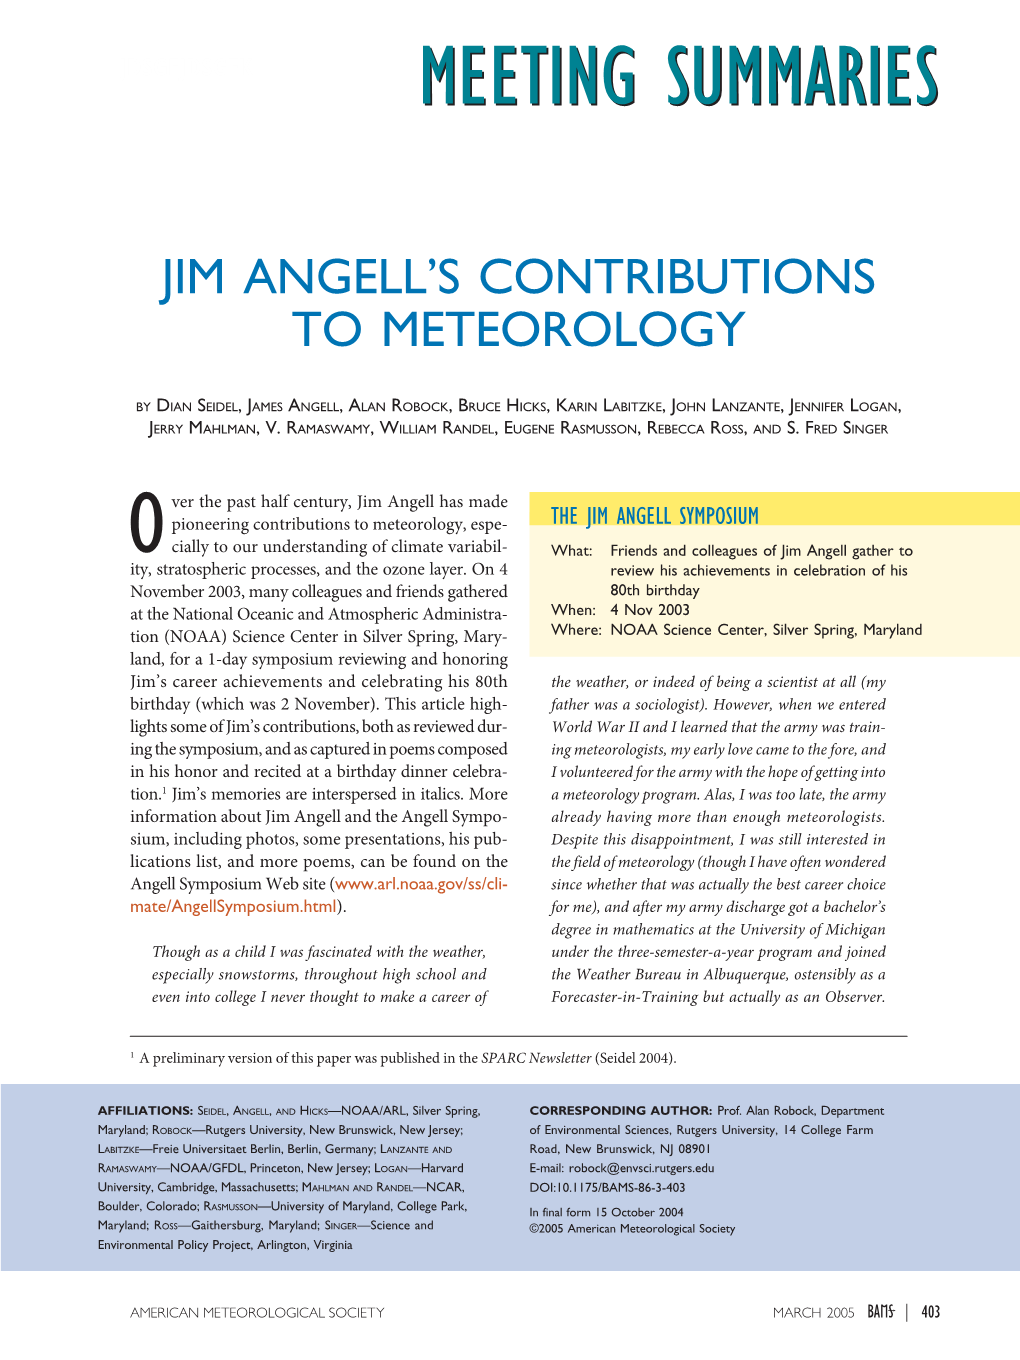 Jim Angell's Contributions to Meteorology